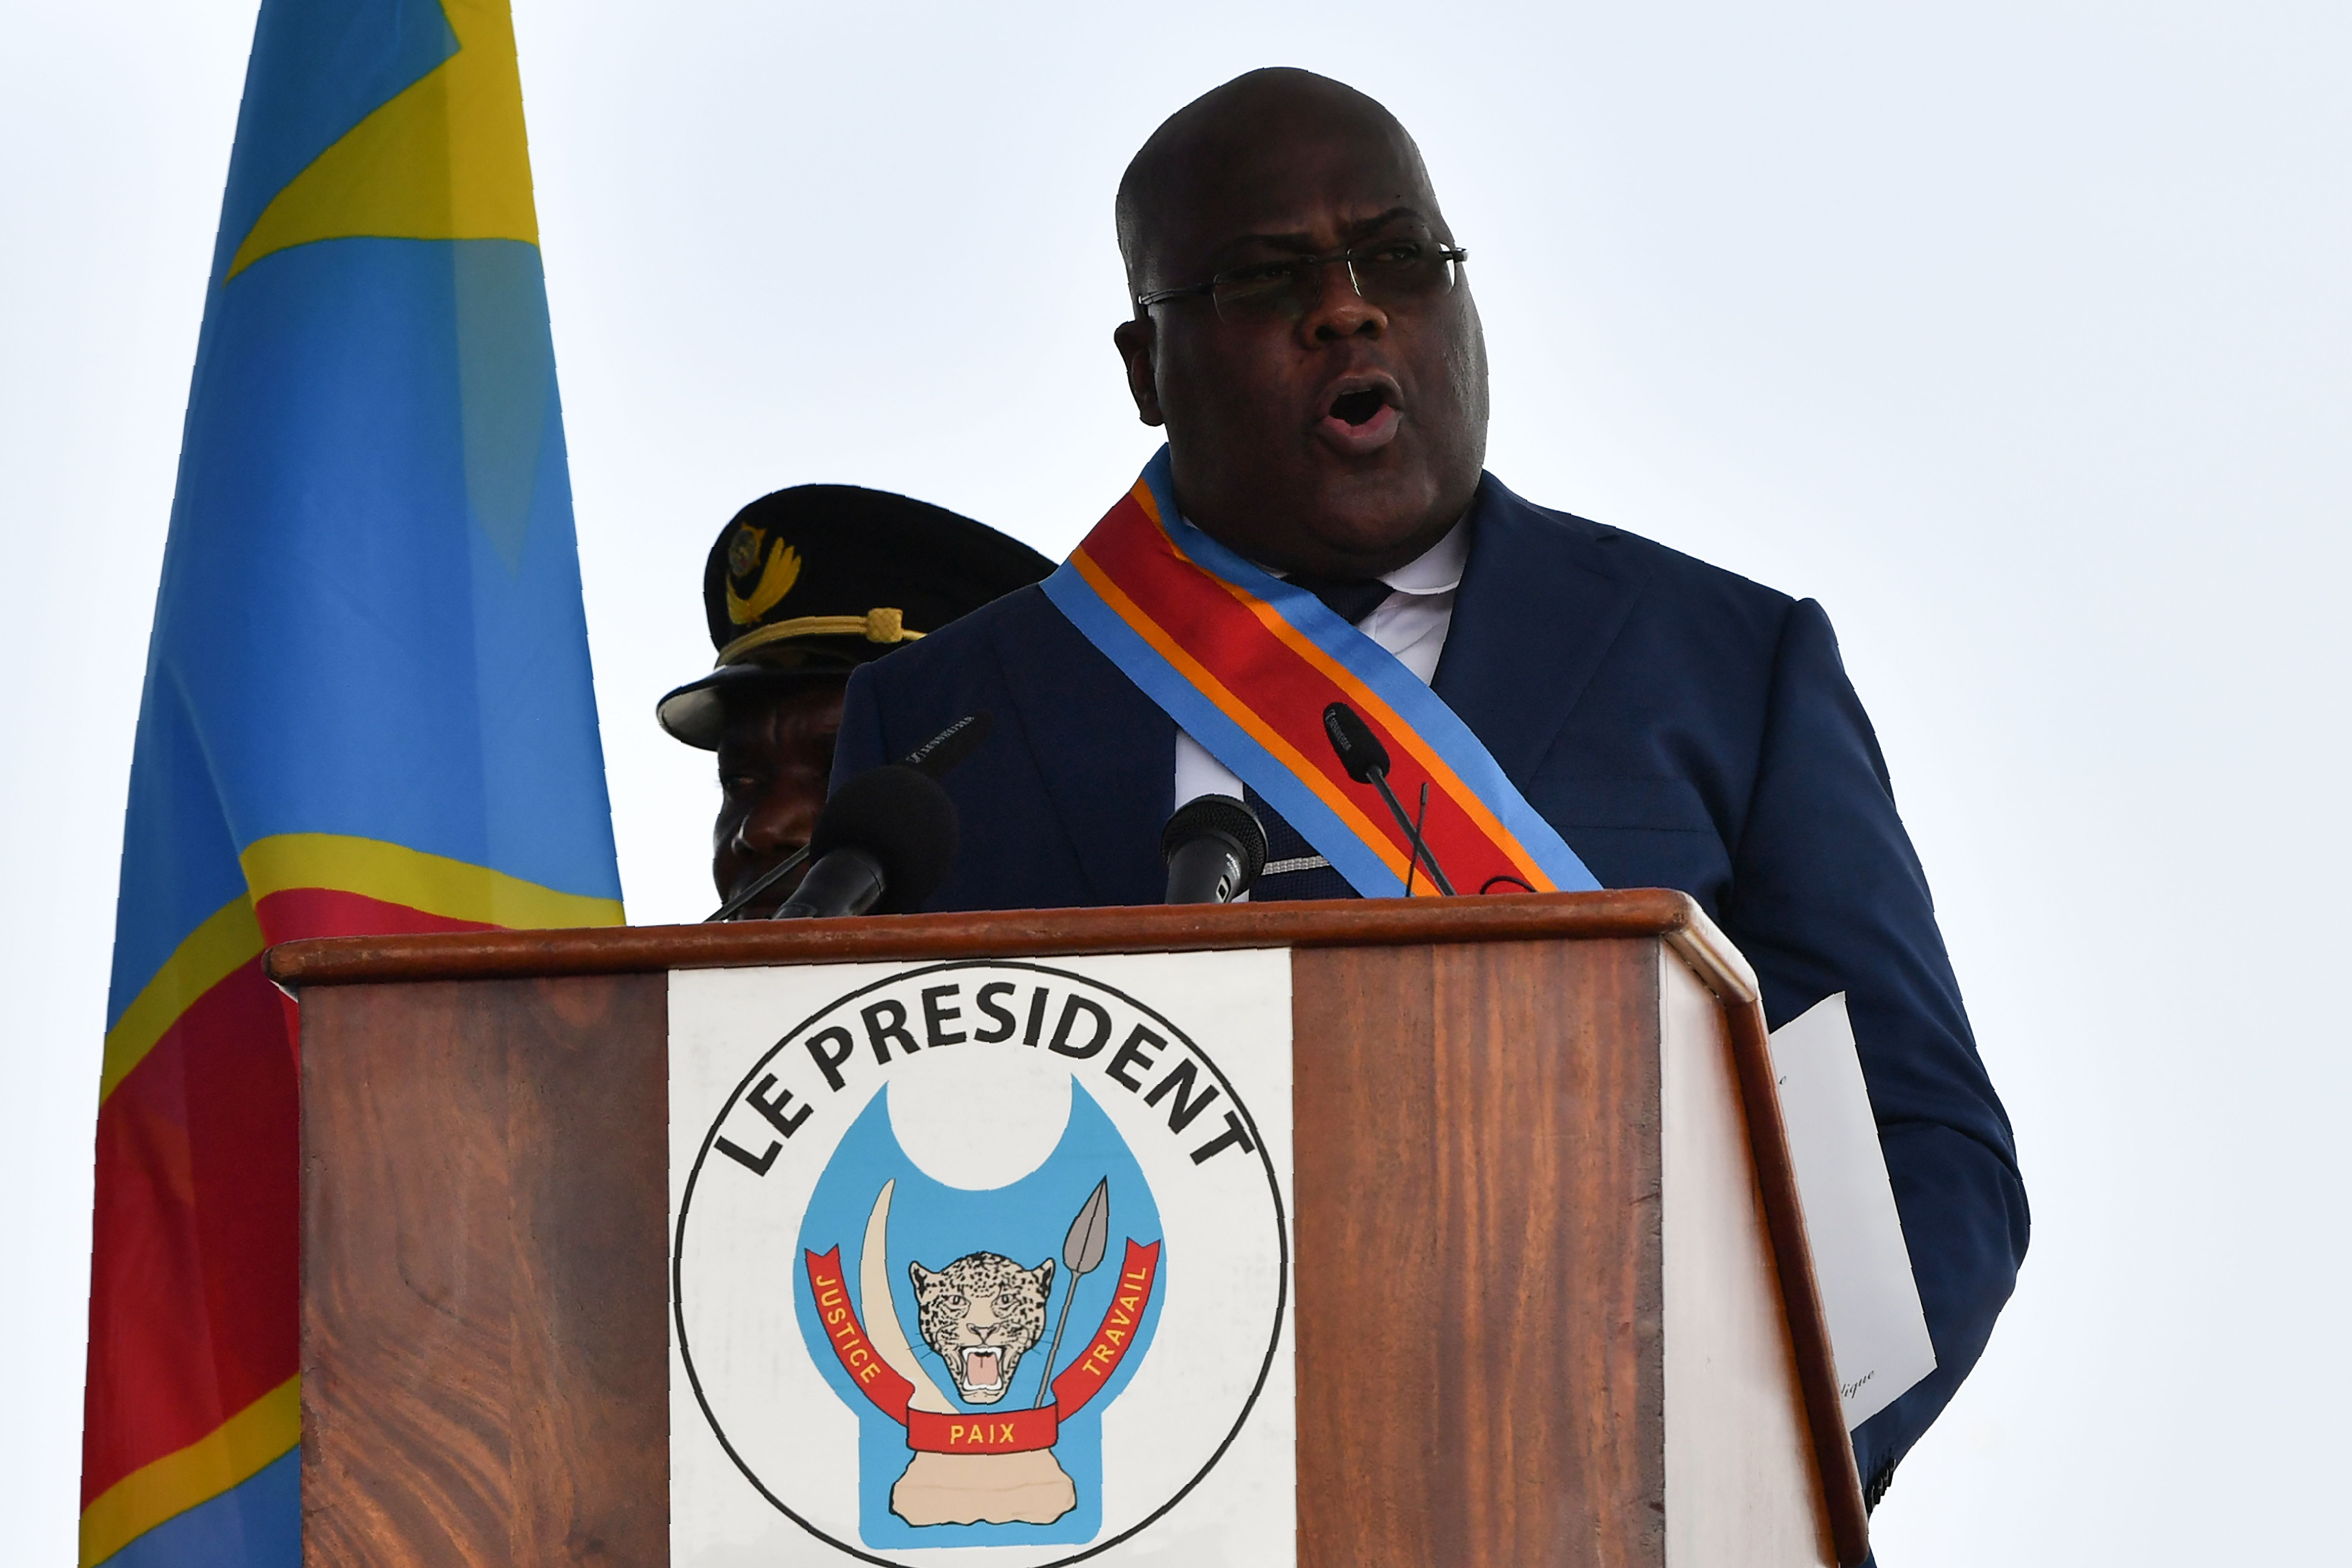 Democratic Republic of the Congo's newly inaugurated President Felix Tshisekedi delivers a speech